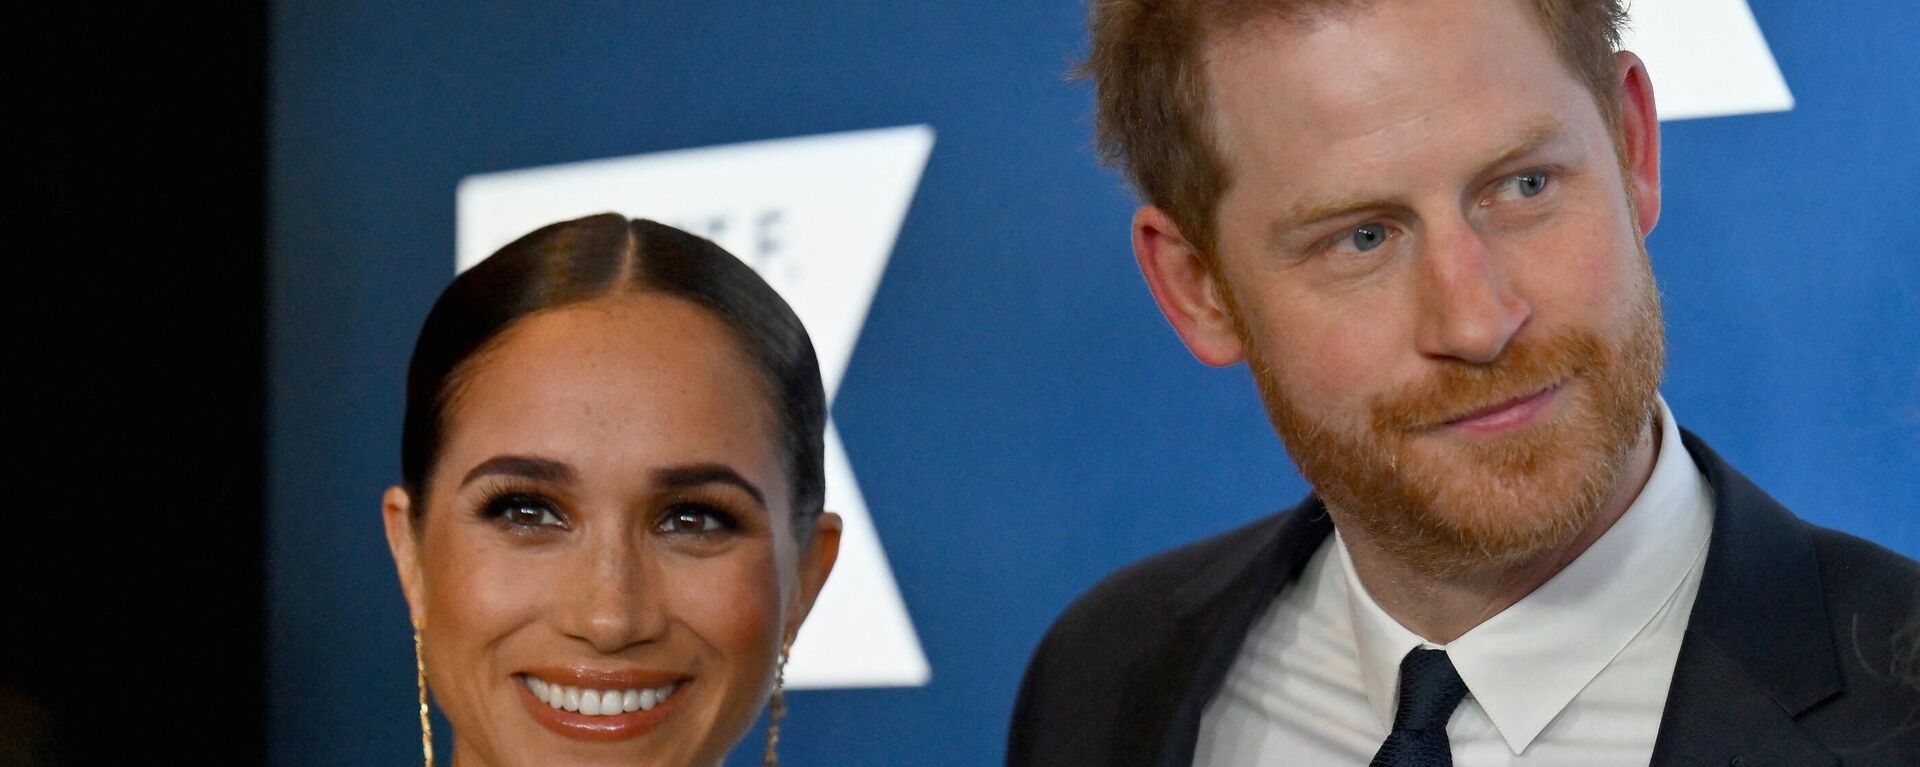 Prince Harry, Duke of Sussex, and Meghan, Duchess of Sussex, arrive at the 2022 Robert F. Kennedy Human Rights Ripple of Hope Award Gala at the Hilton Midtown in New York on December 6, 2022.  - Sputnik International, 1920, 11.12.2022